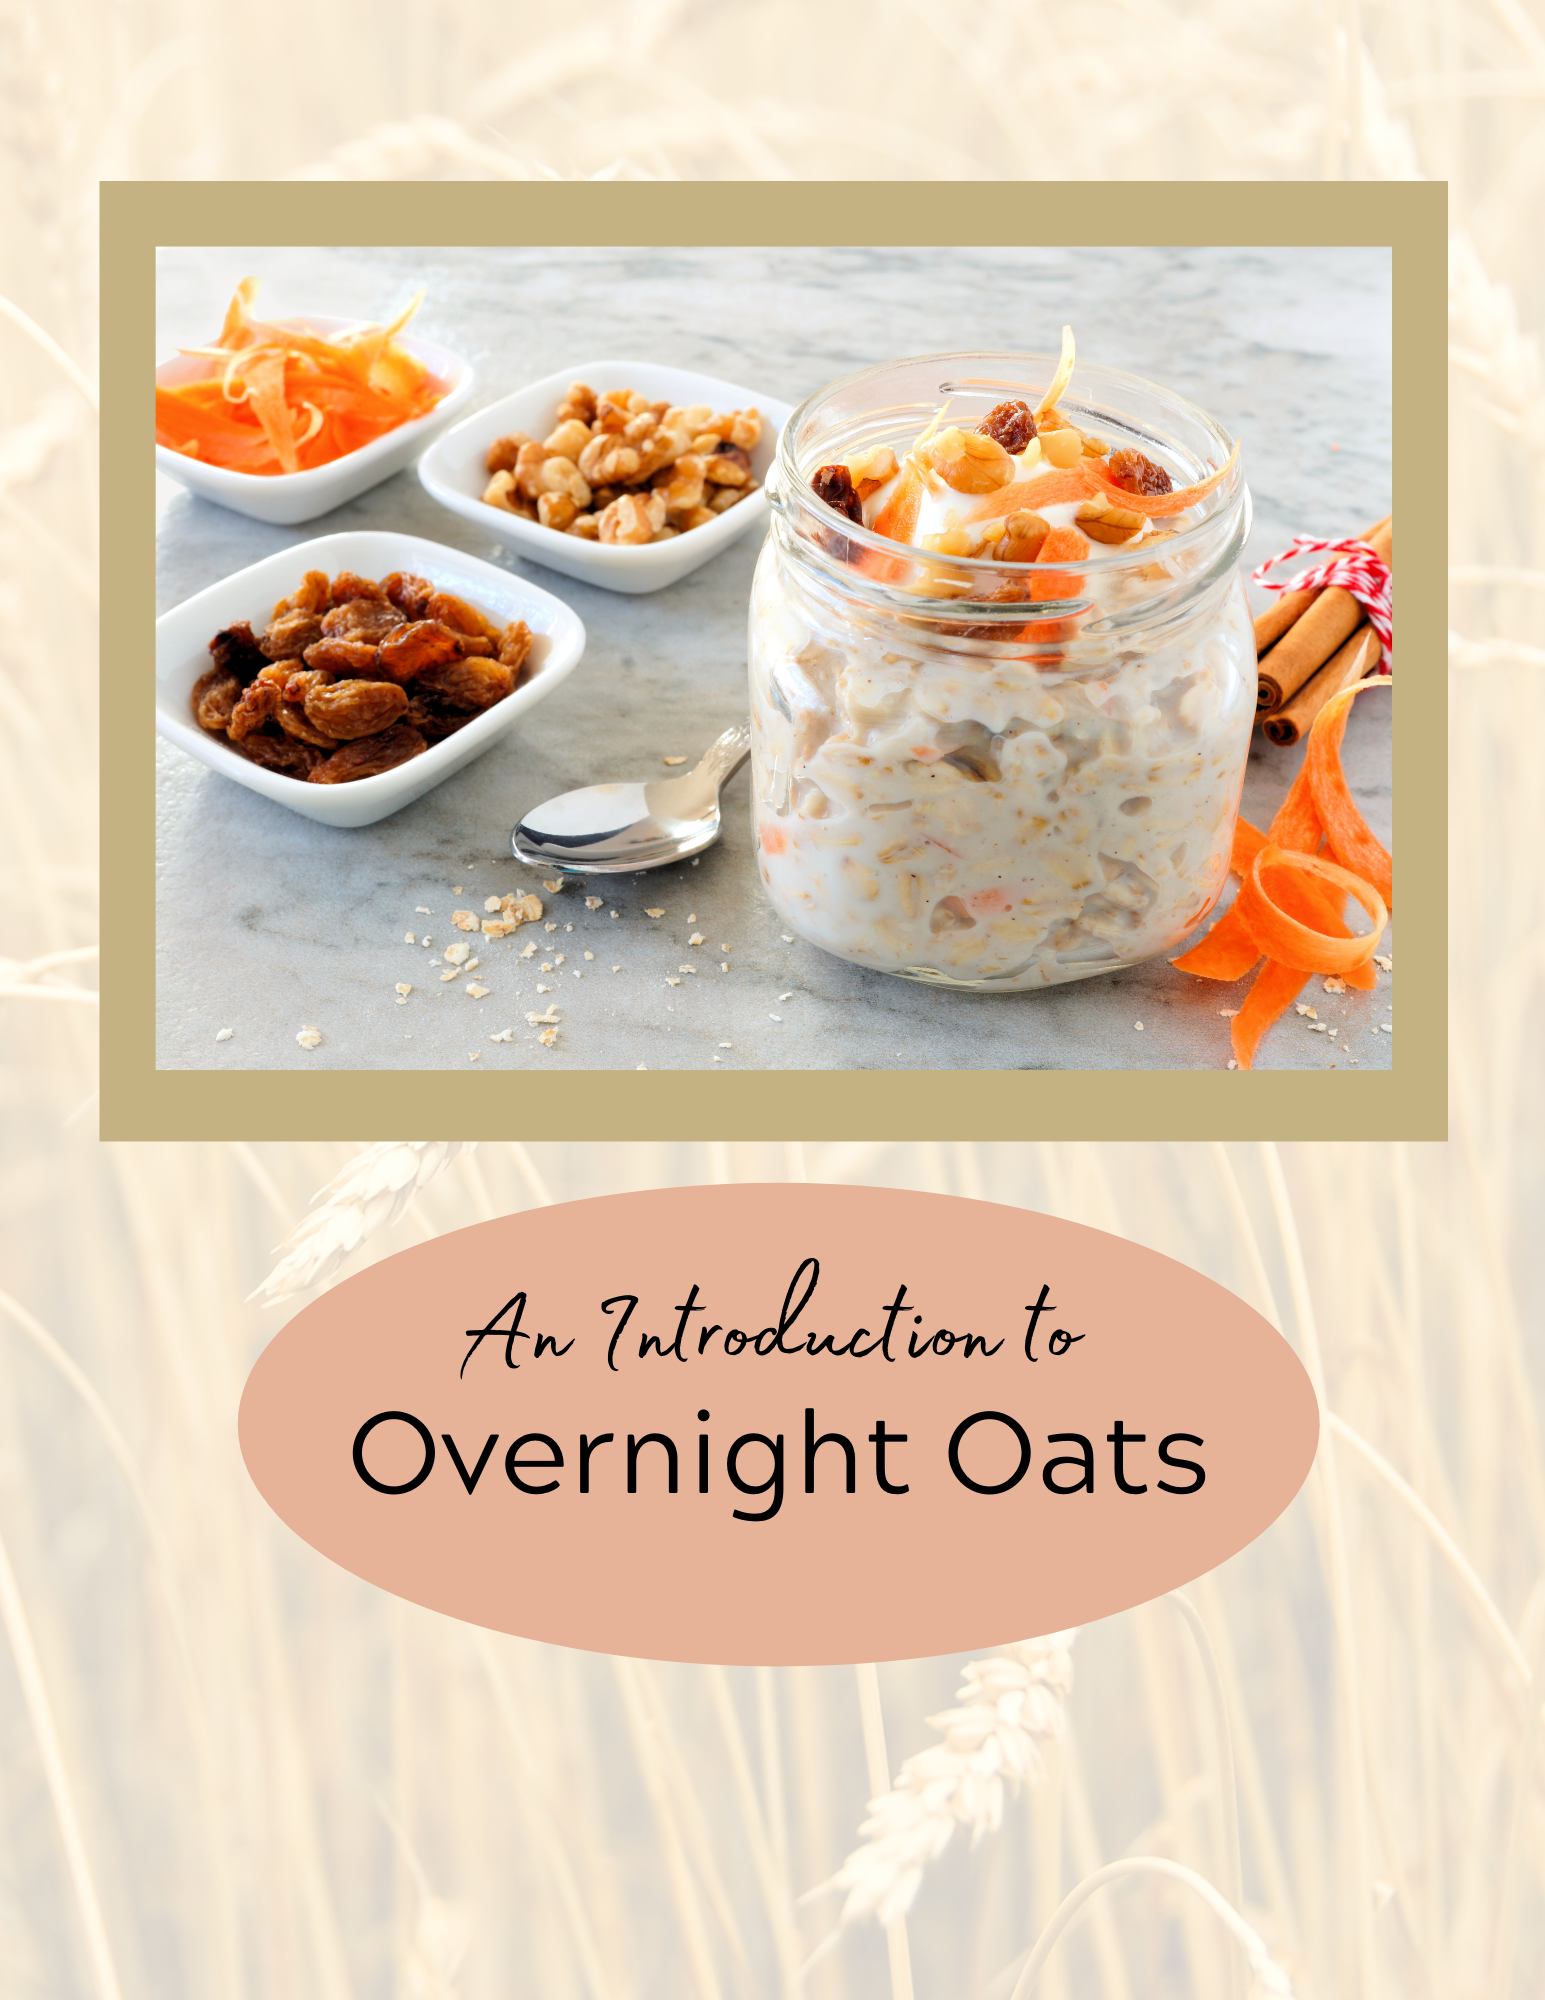 Photo of a jar of overnight oats with ingredients in bowls to the side